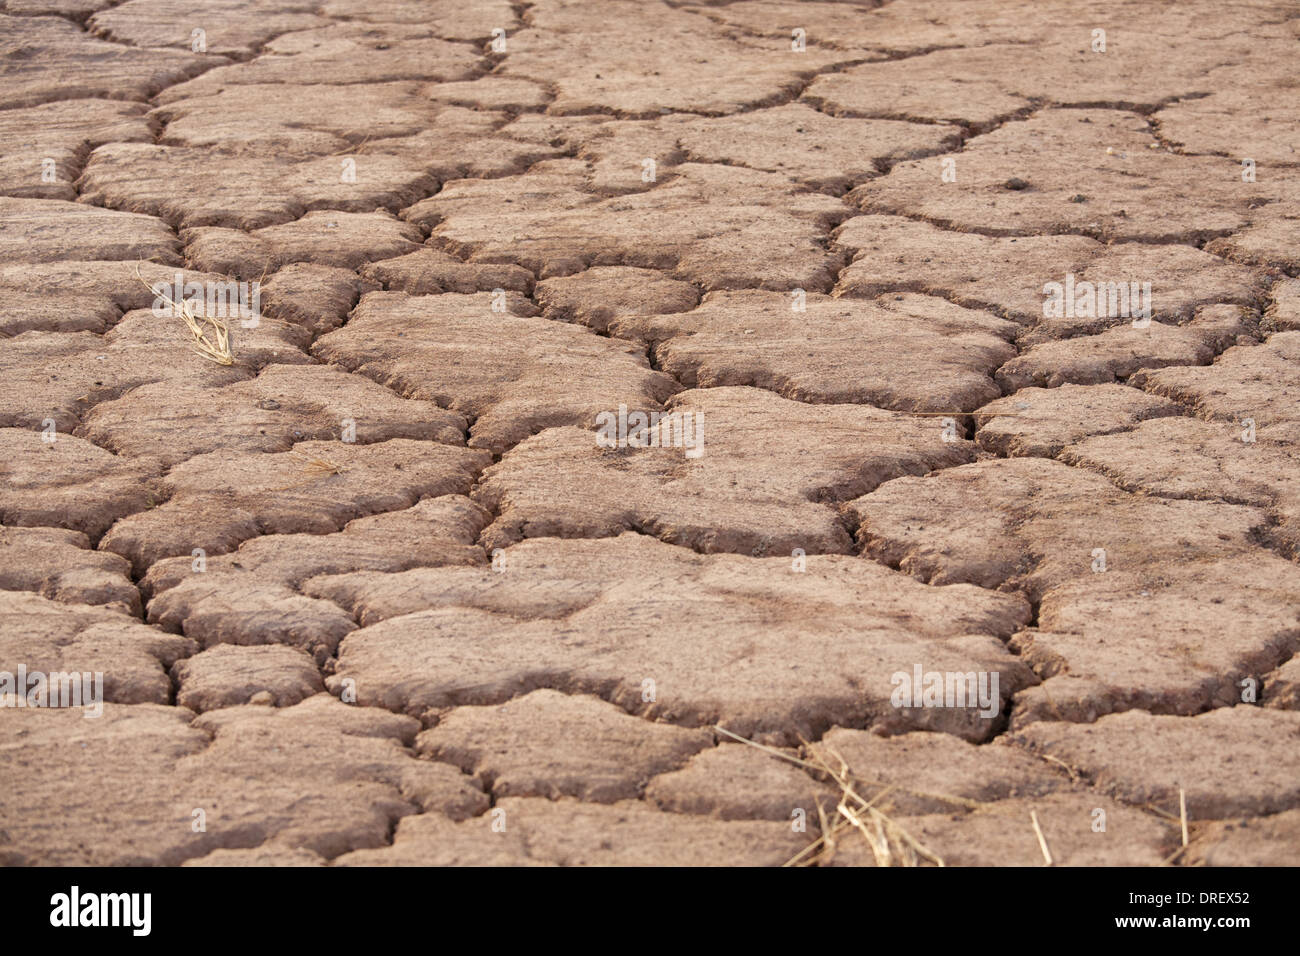 parched earth Stock Photo